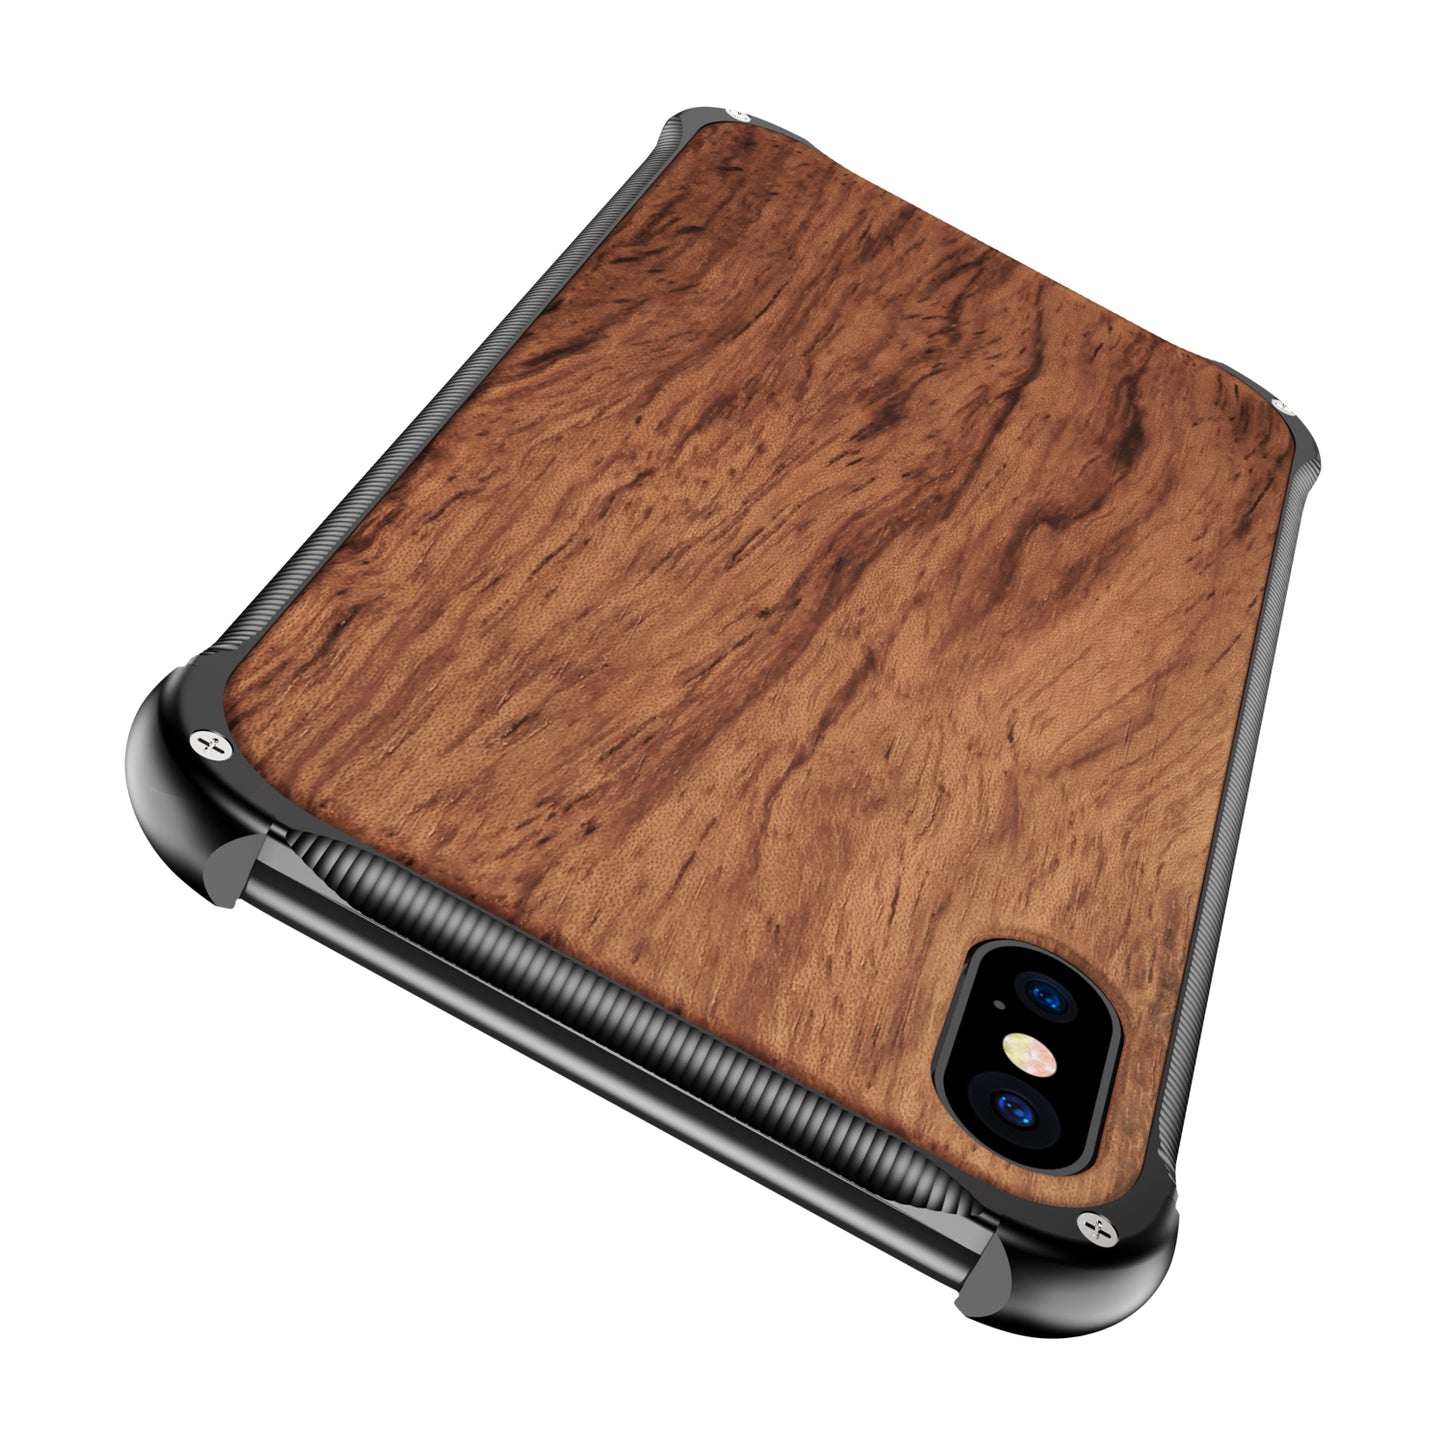 Kylin Armor Aluminum Metal Frame Natural Wood / Tempered Glass Back Case Cover